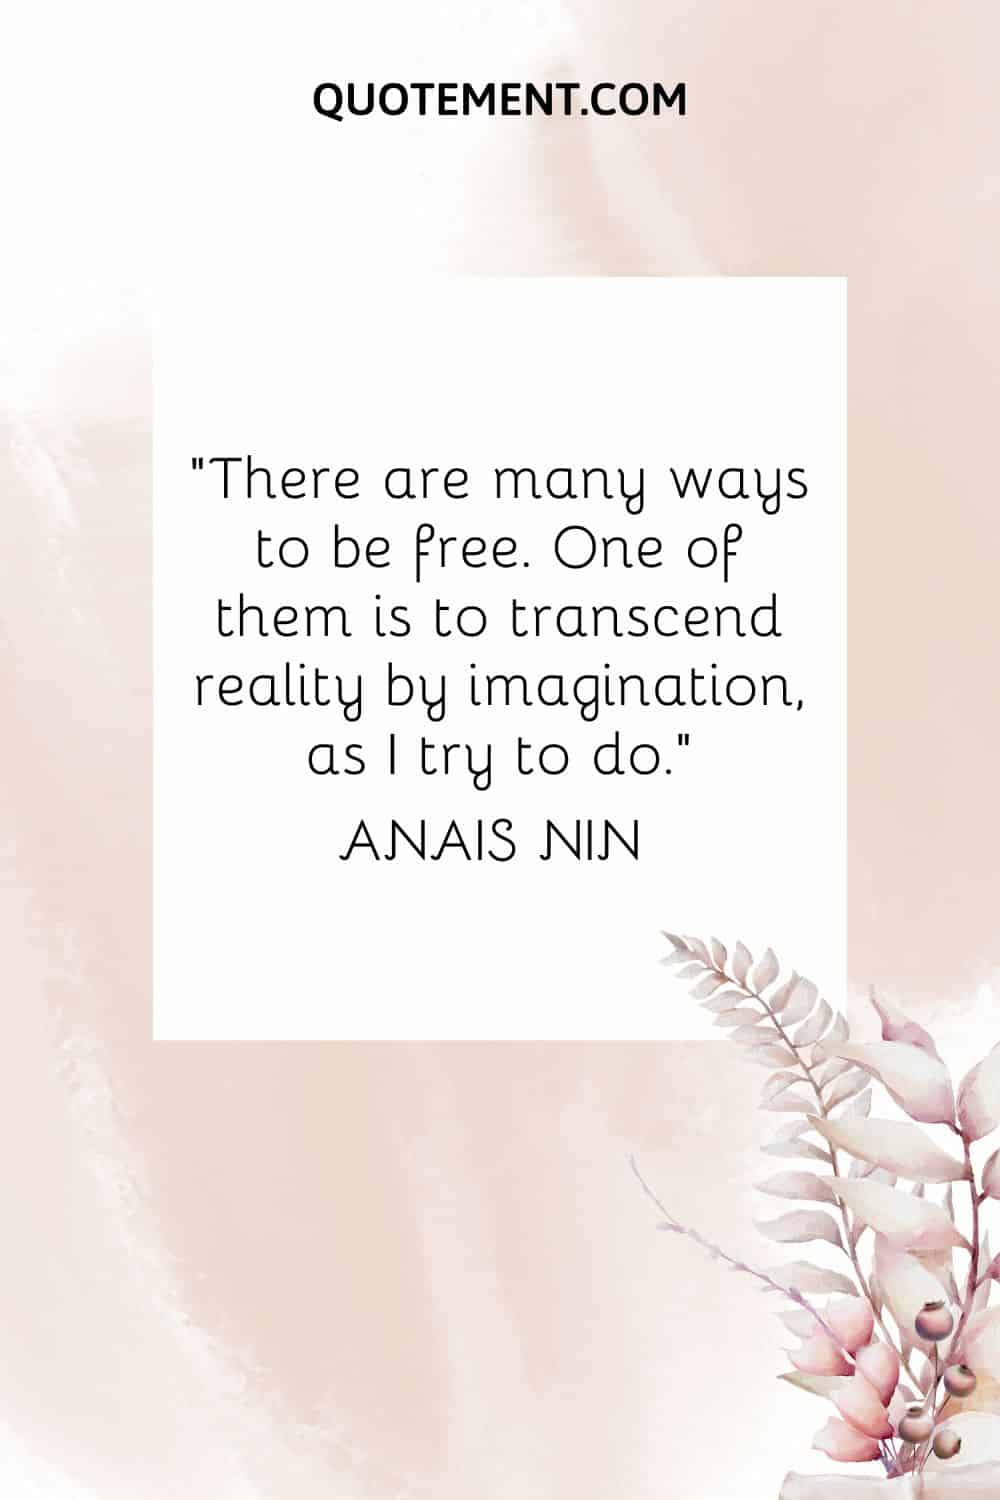 “There are many ways to be free. One of them is to transcend reality by imagination, as I try to do.” — Anais Nin